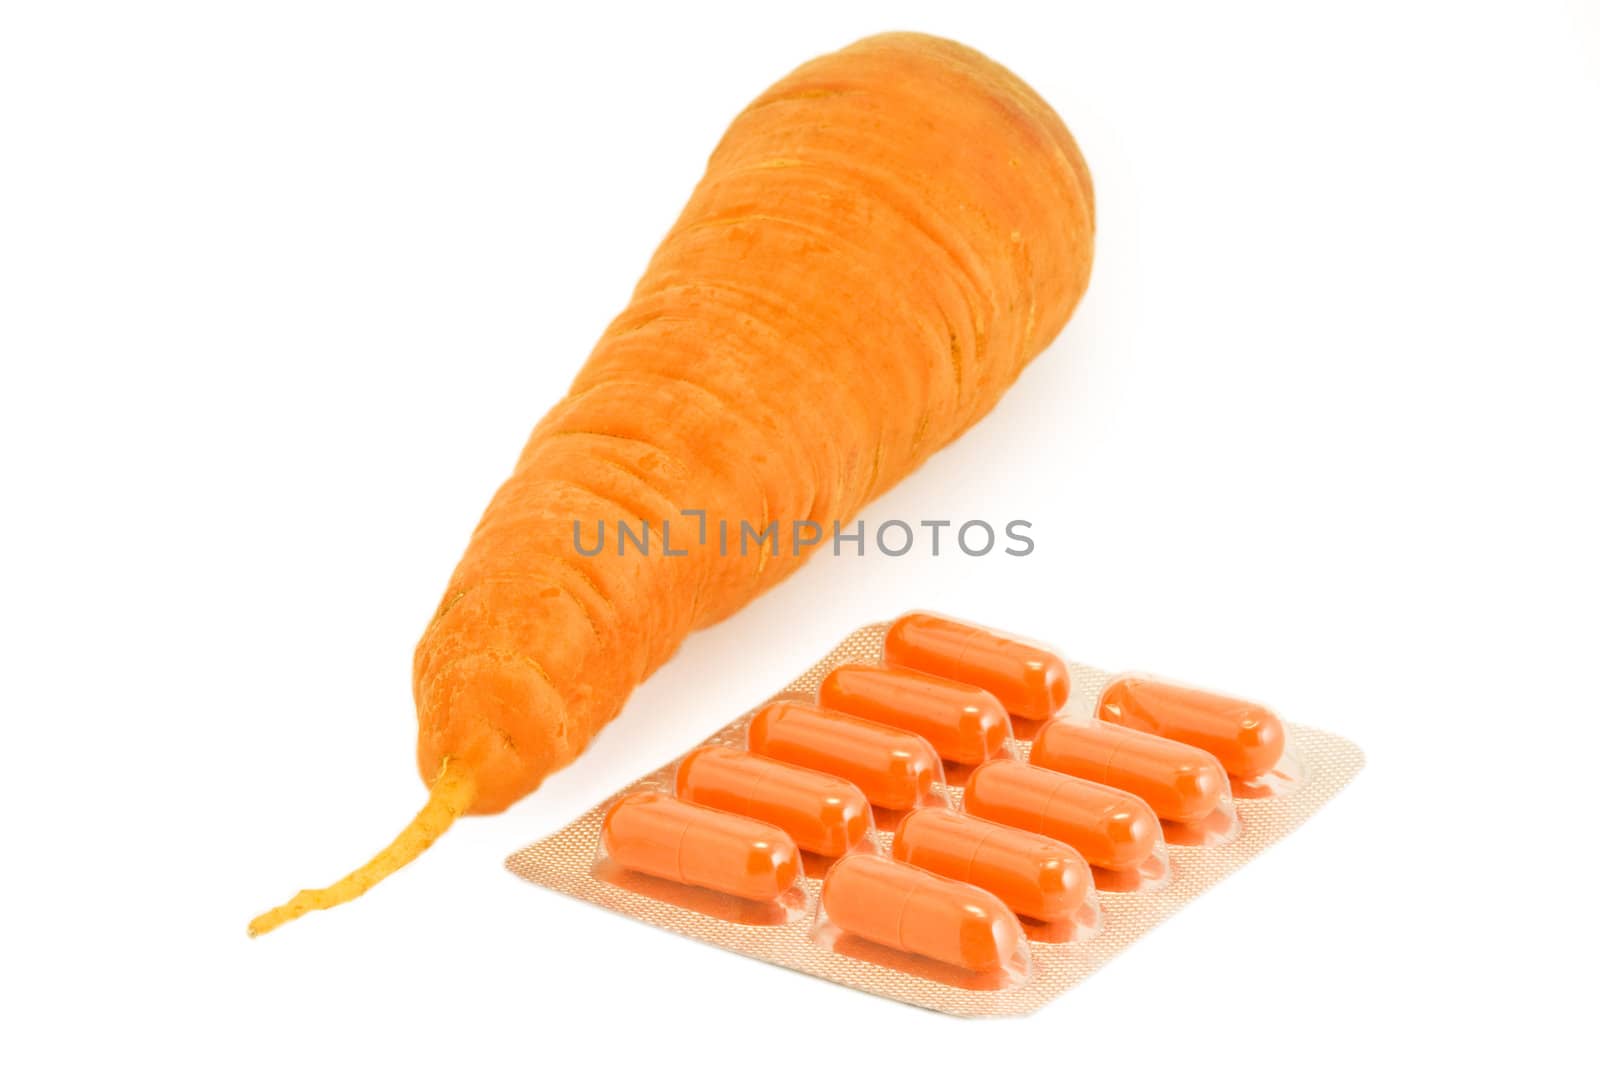 Vitamin pills with carrot on isolated white. Make your choice